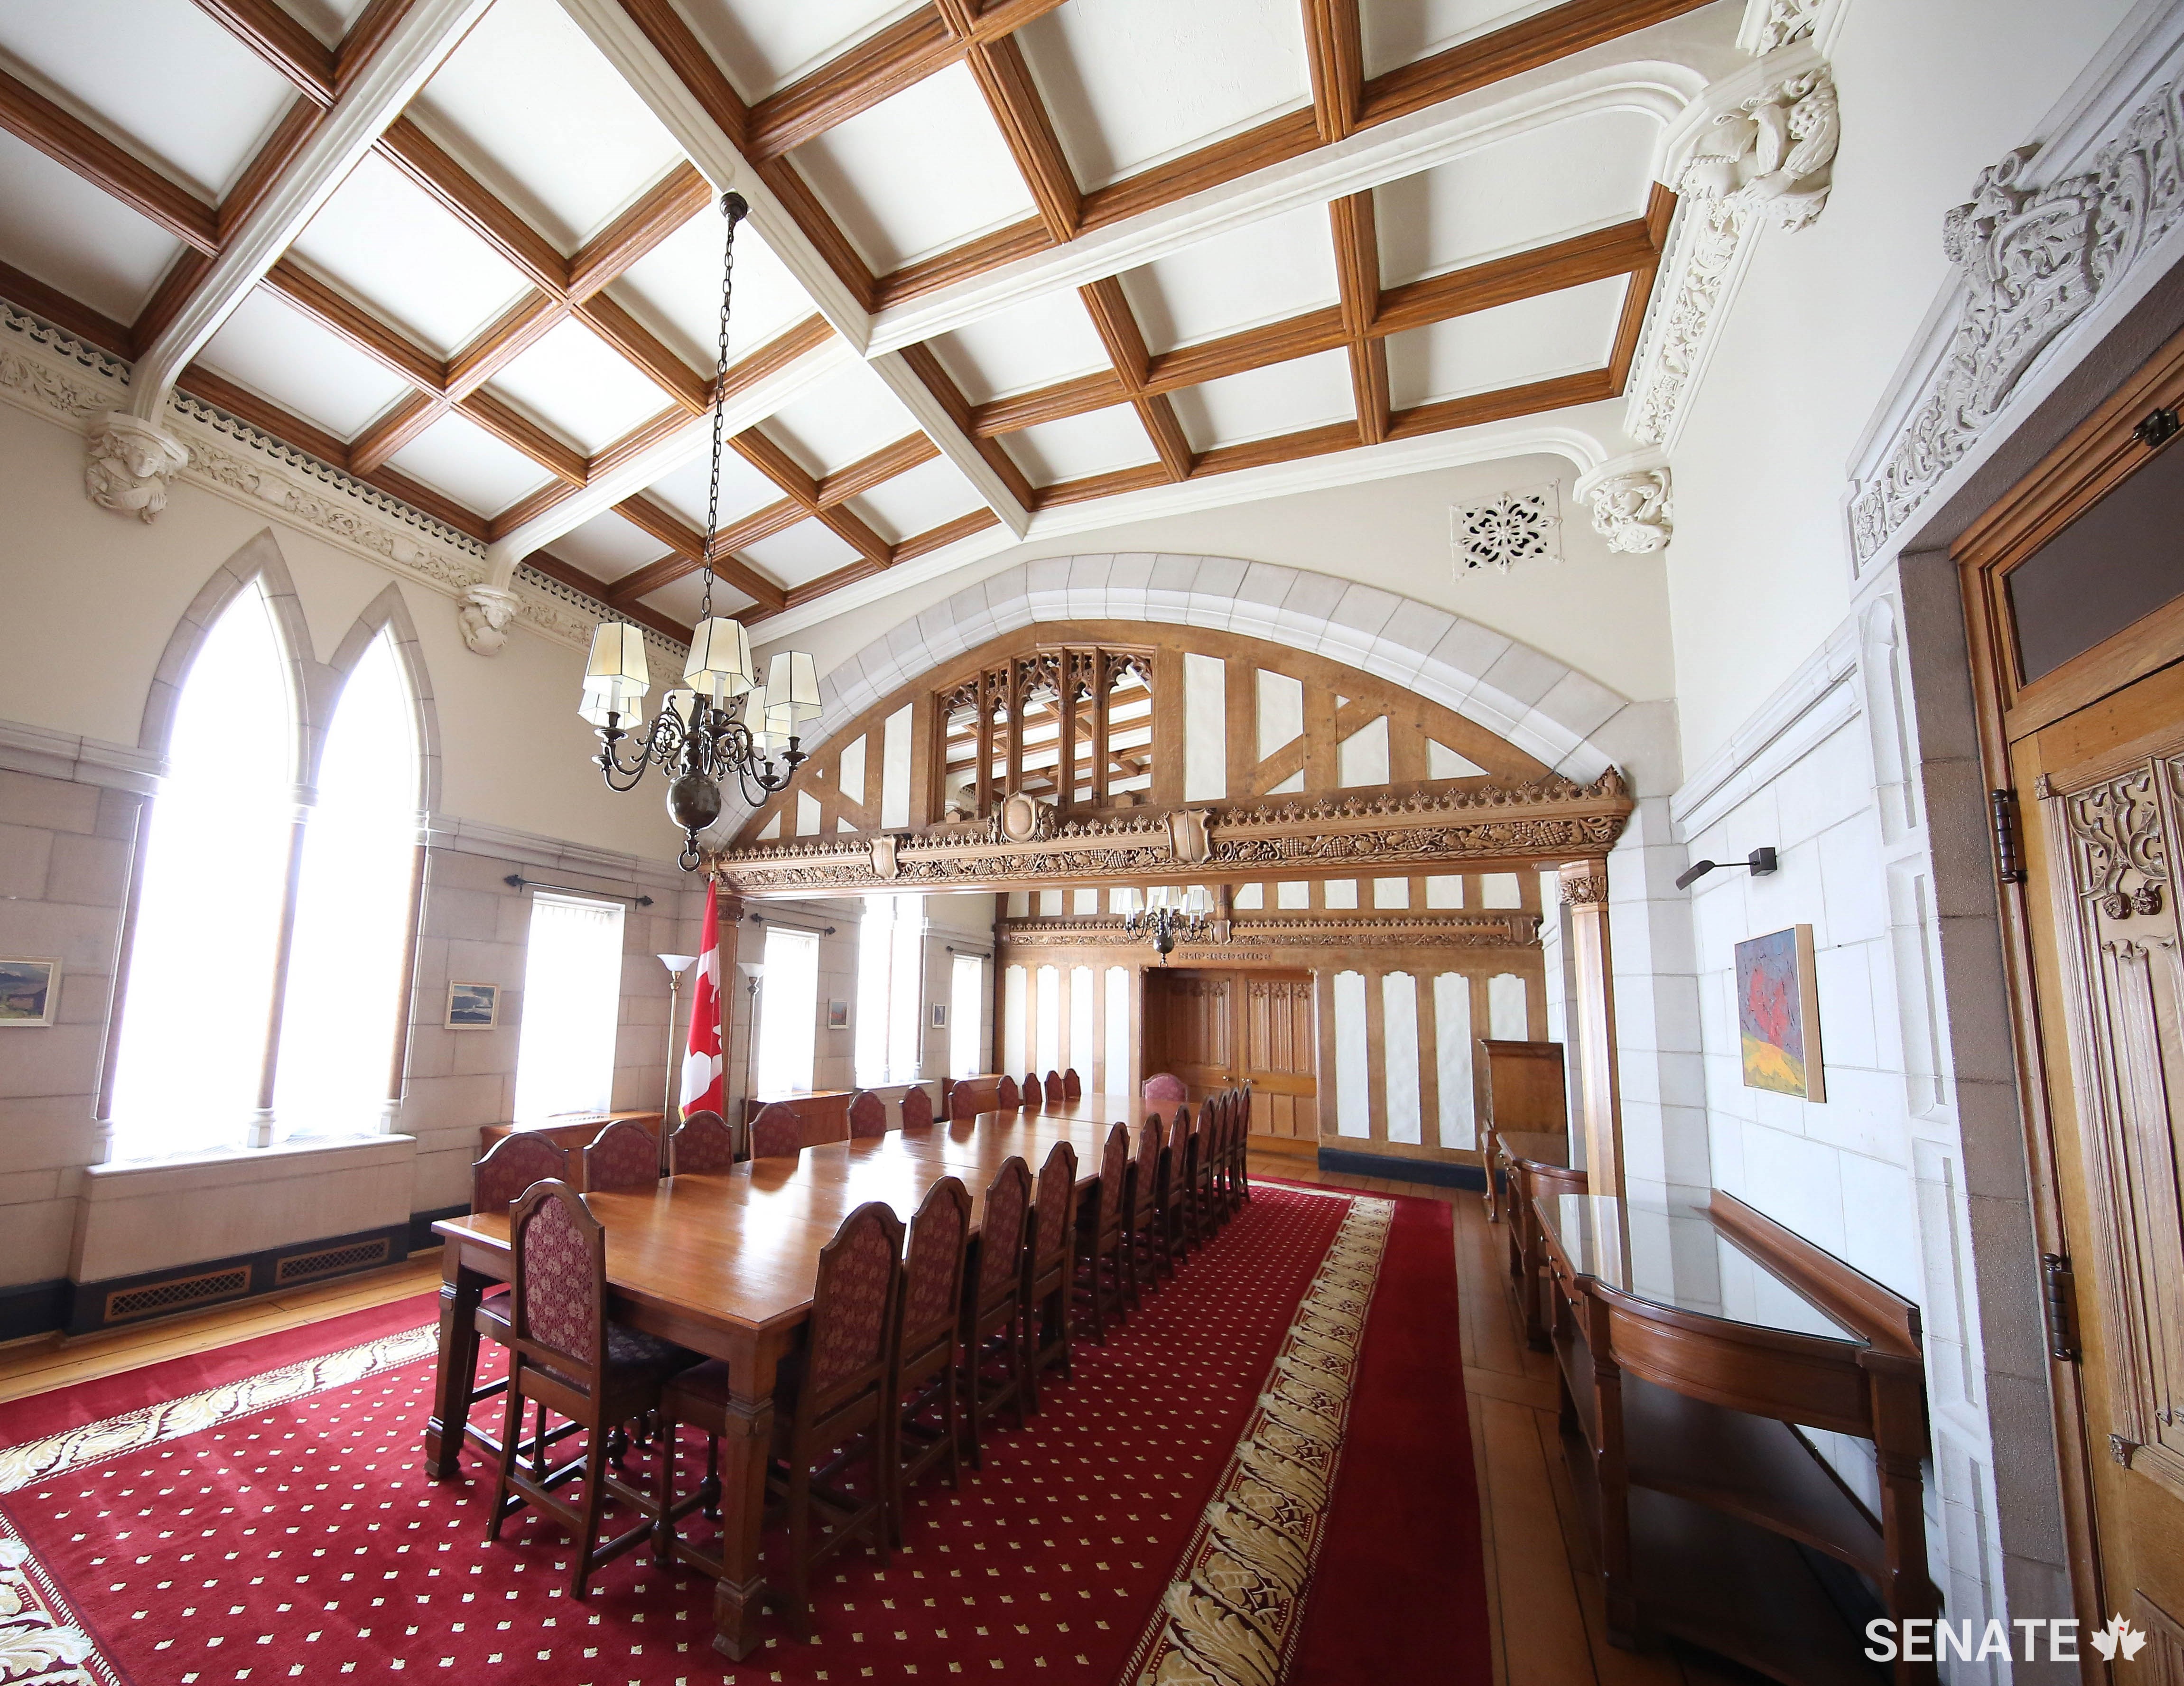 The coats of arms of Canada’s first 12 governors general form cornices in the Senate Speaker’s dining room, as well as in two neighbouring offices.